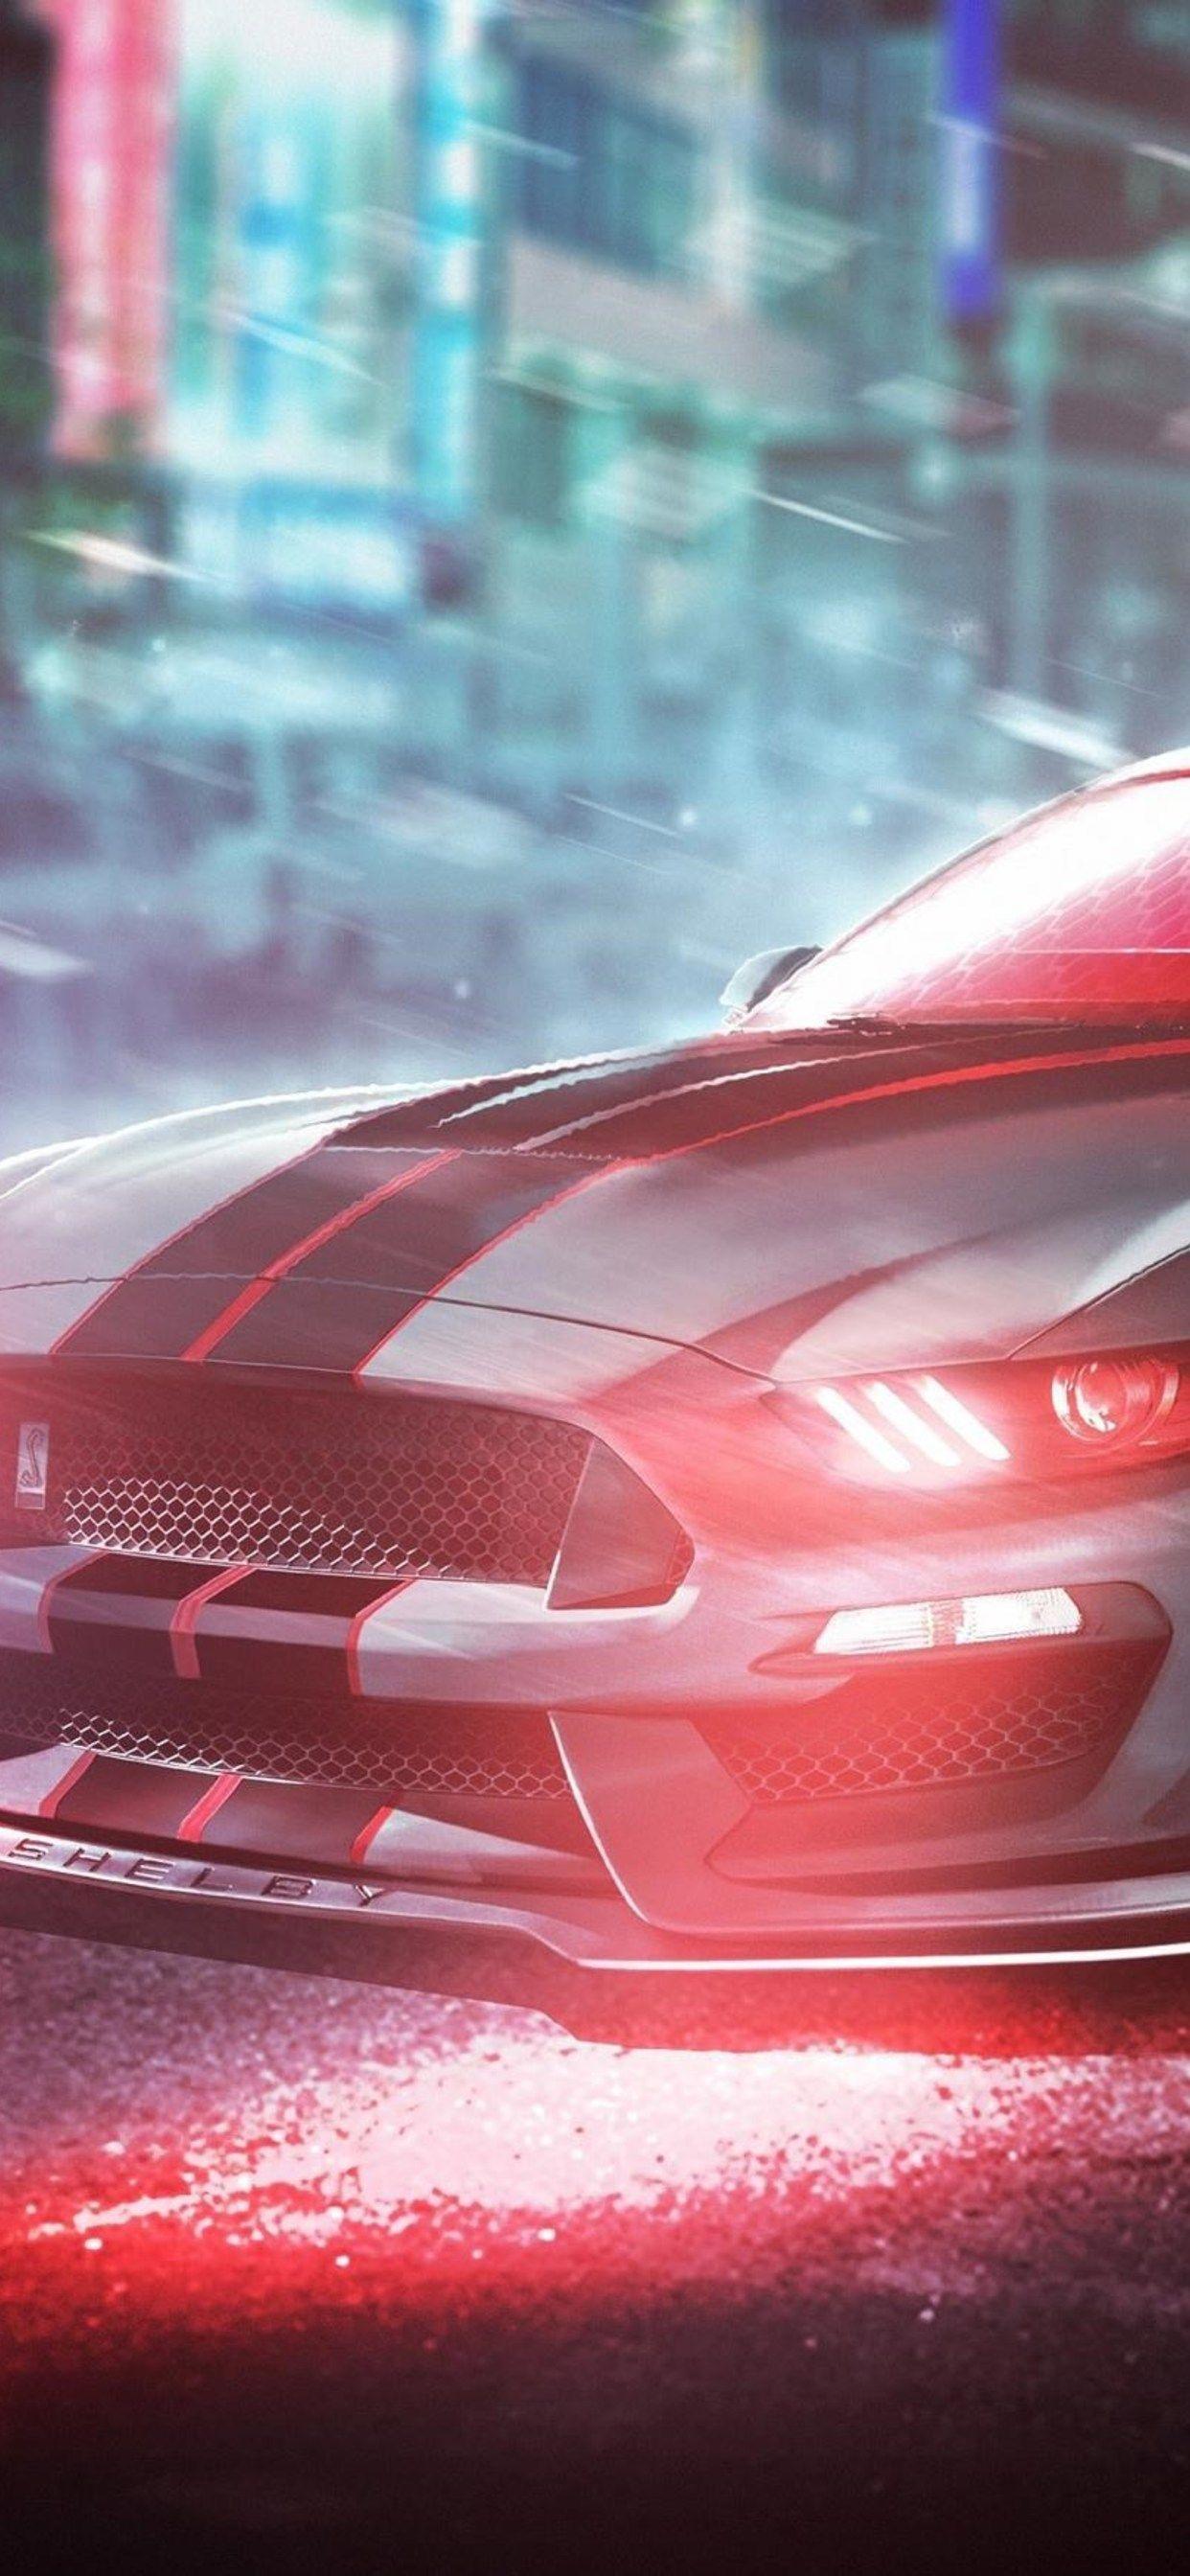 Cars iPhone Wallpapers - Top Free Cars